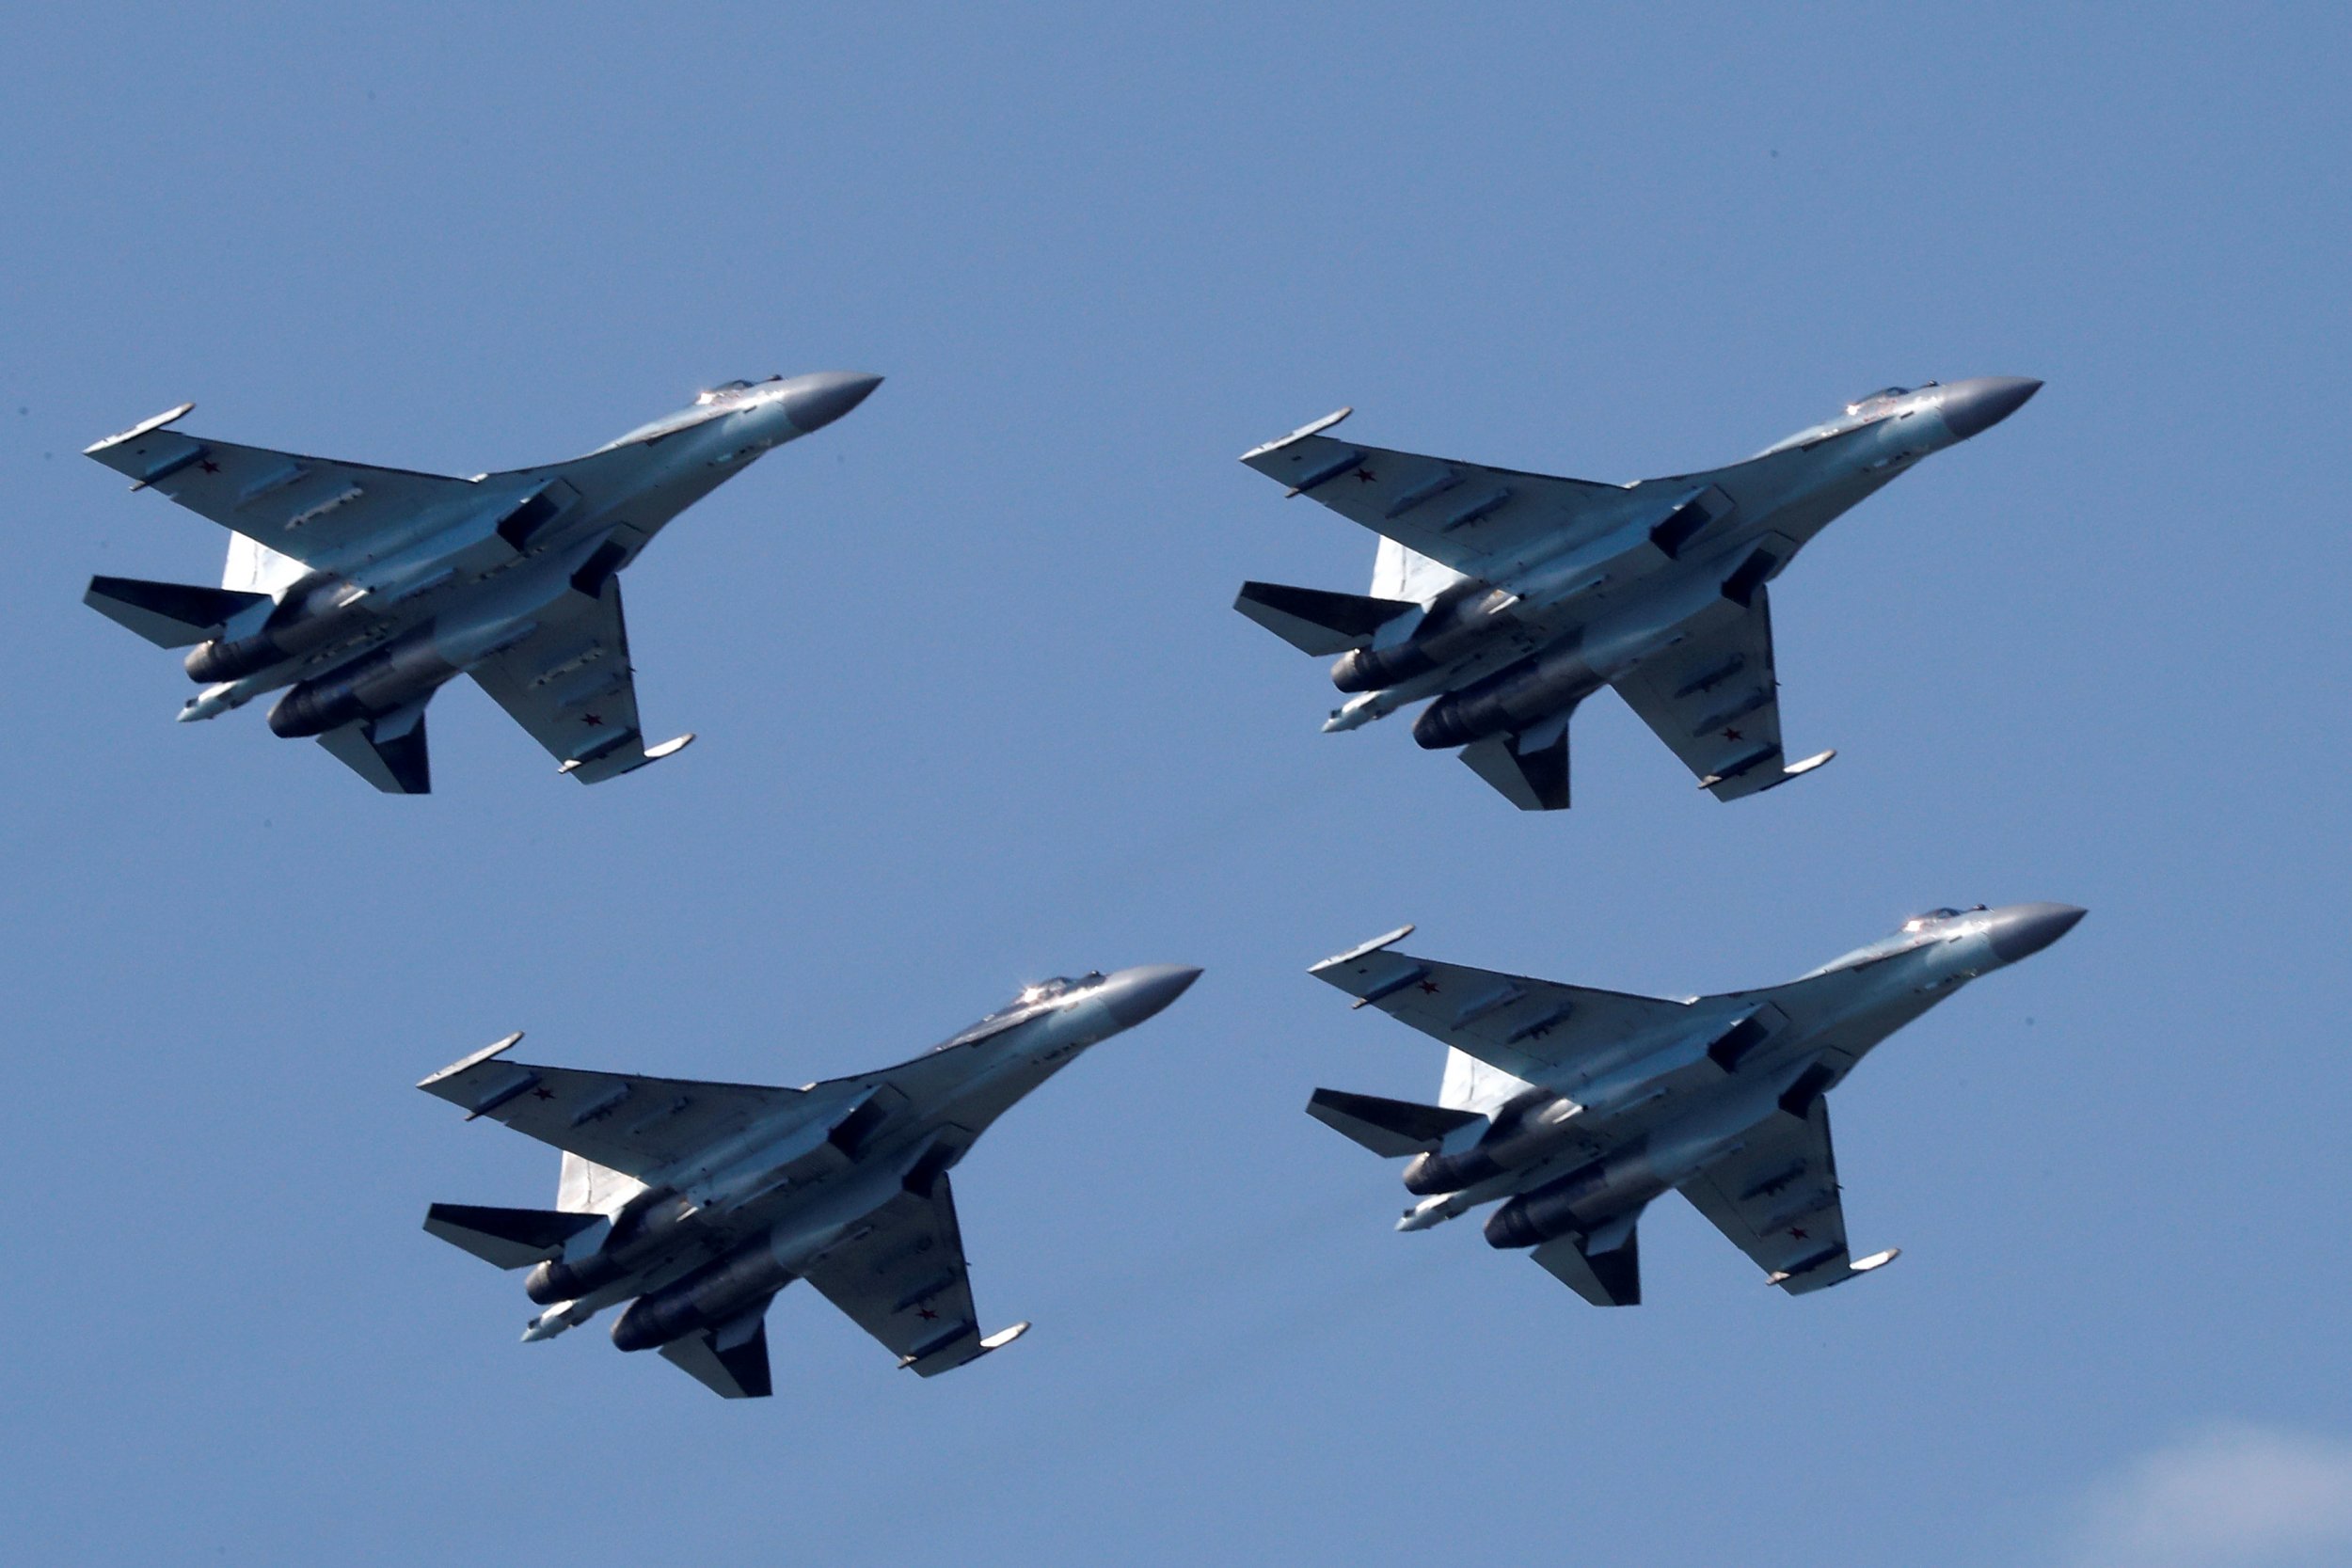 08_09_Russia_jets